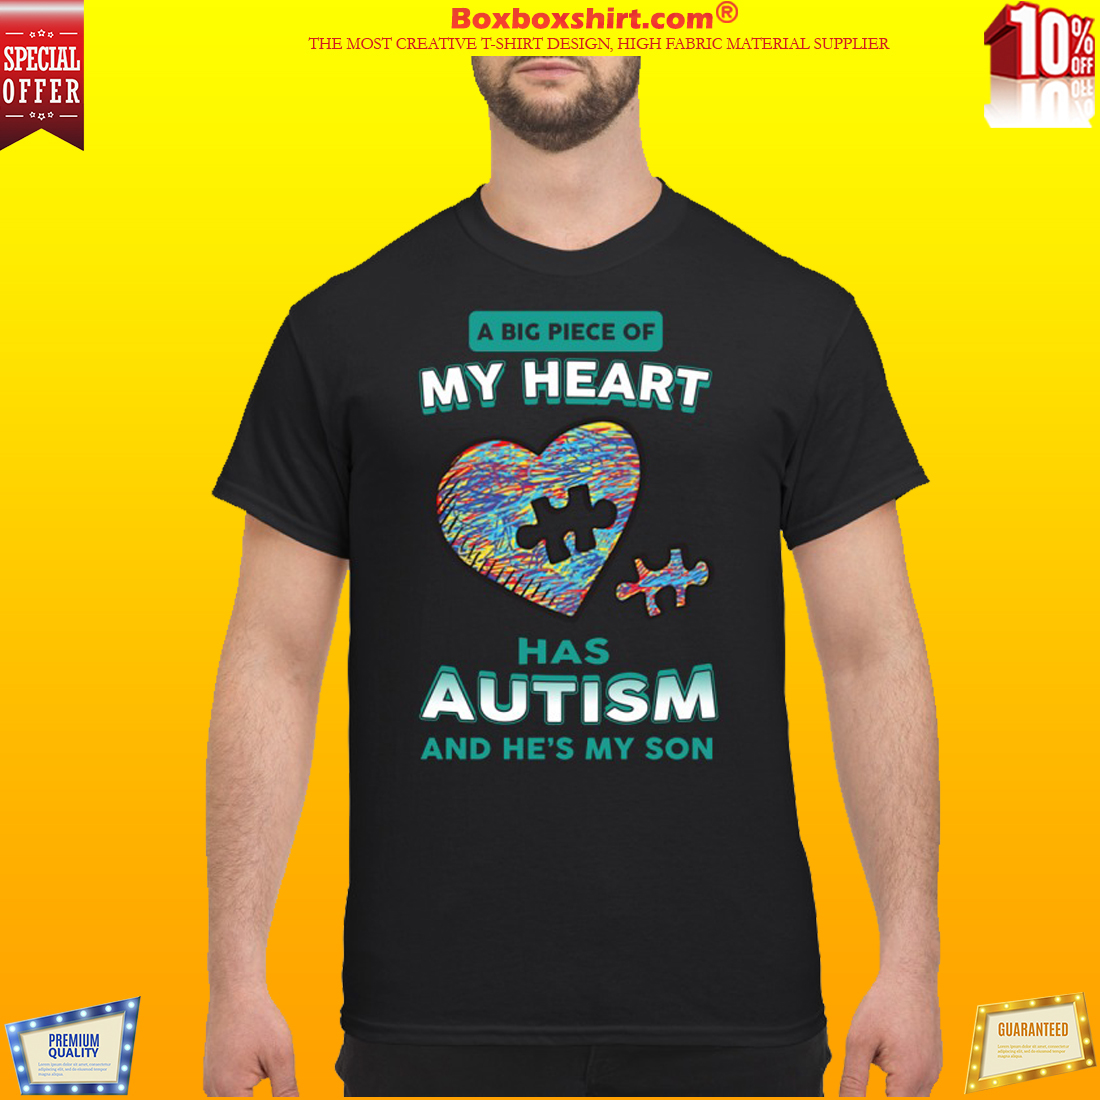 A big piece of my heart has autism he's my son classic shirt